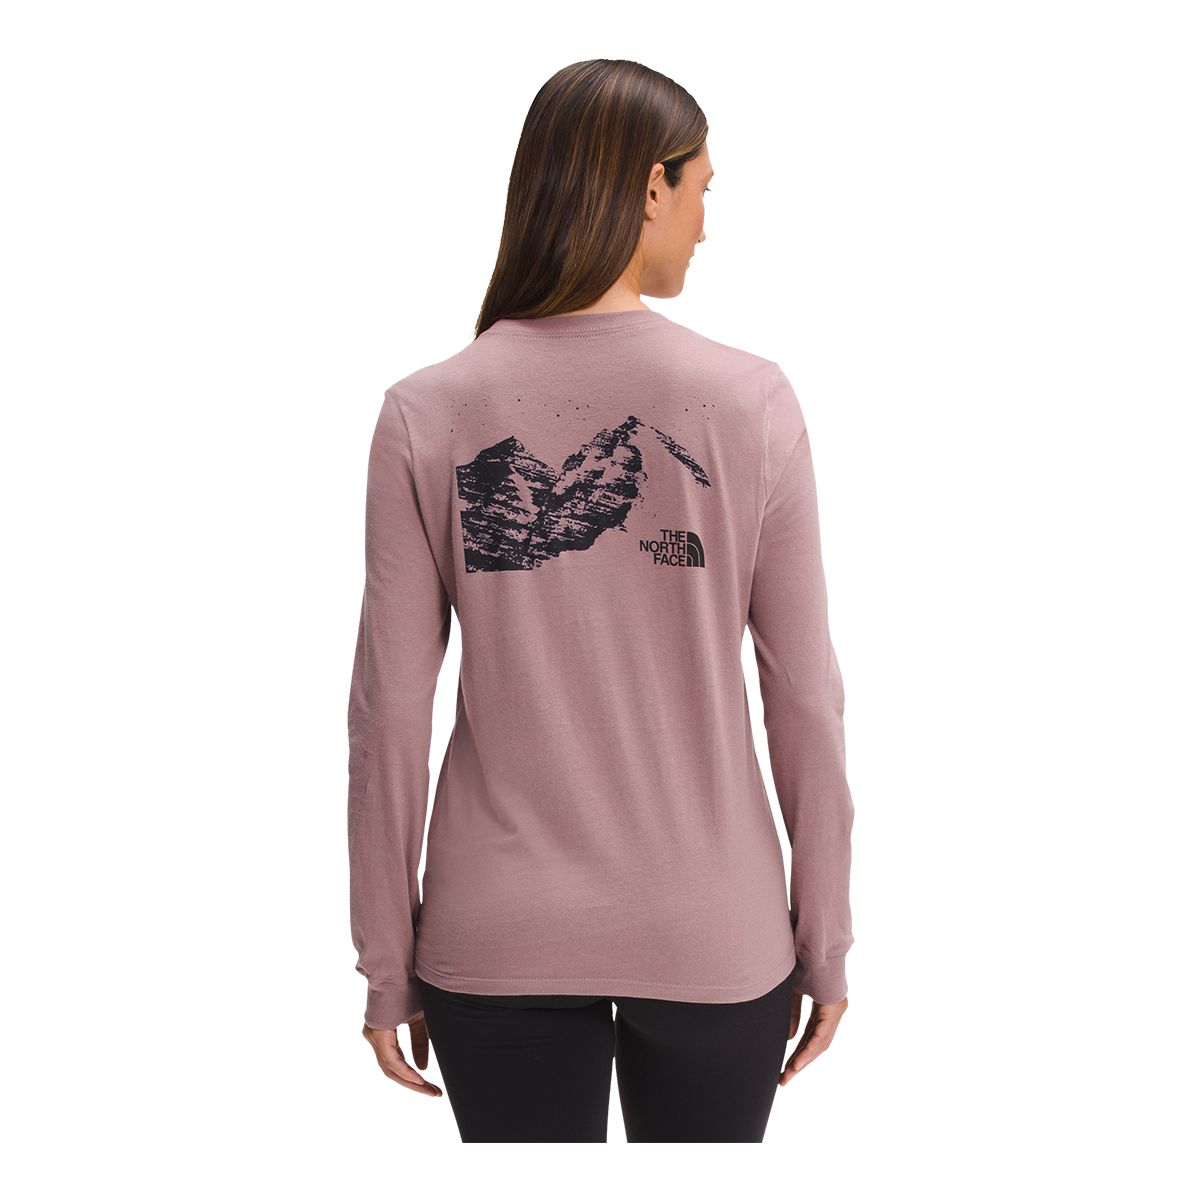 The North Face Women's Snowy Mountain Long Sleeve Cotton Hiking T Shirt